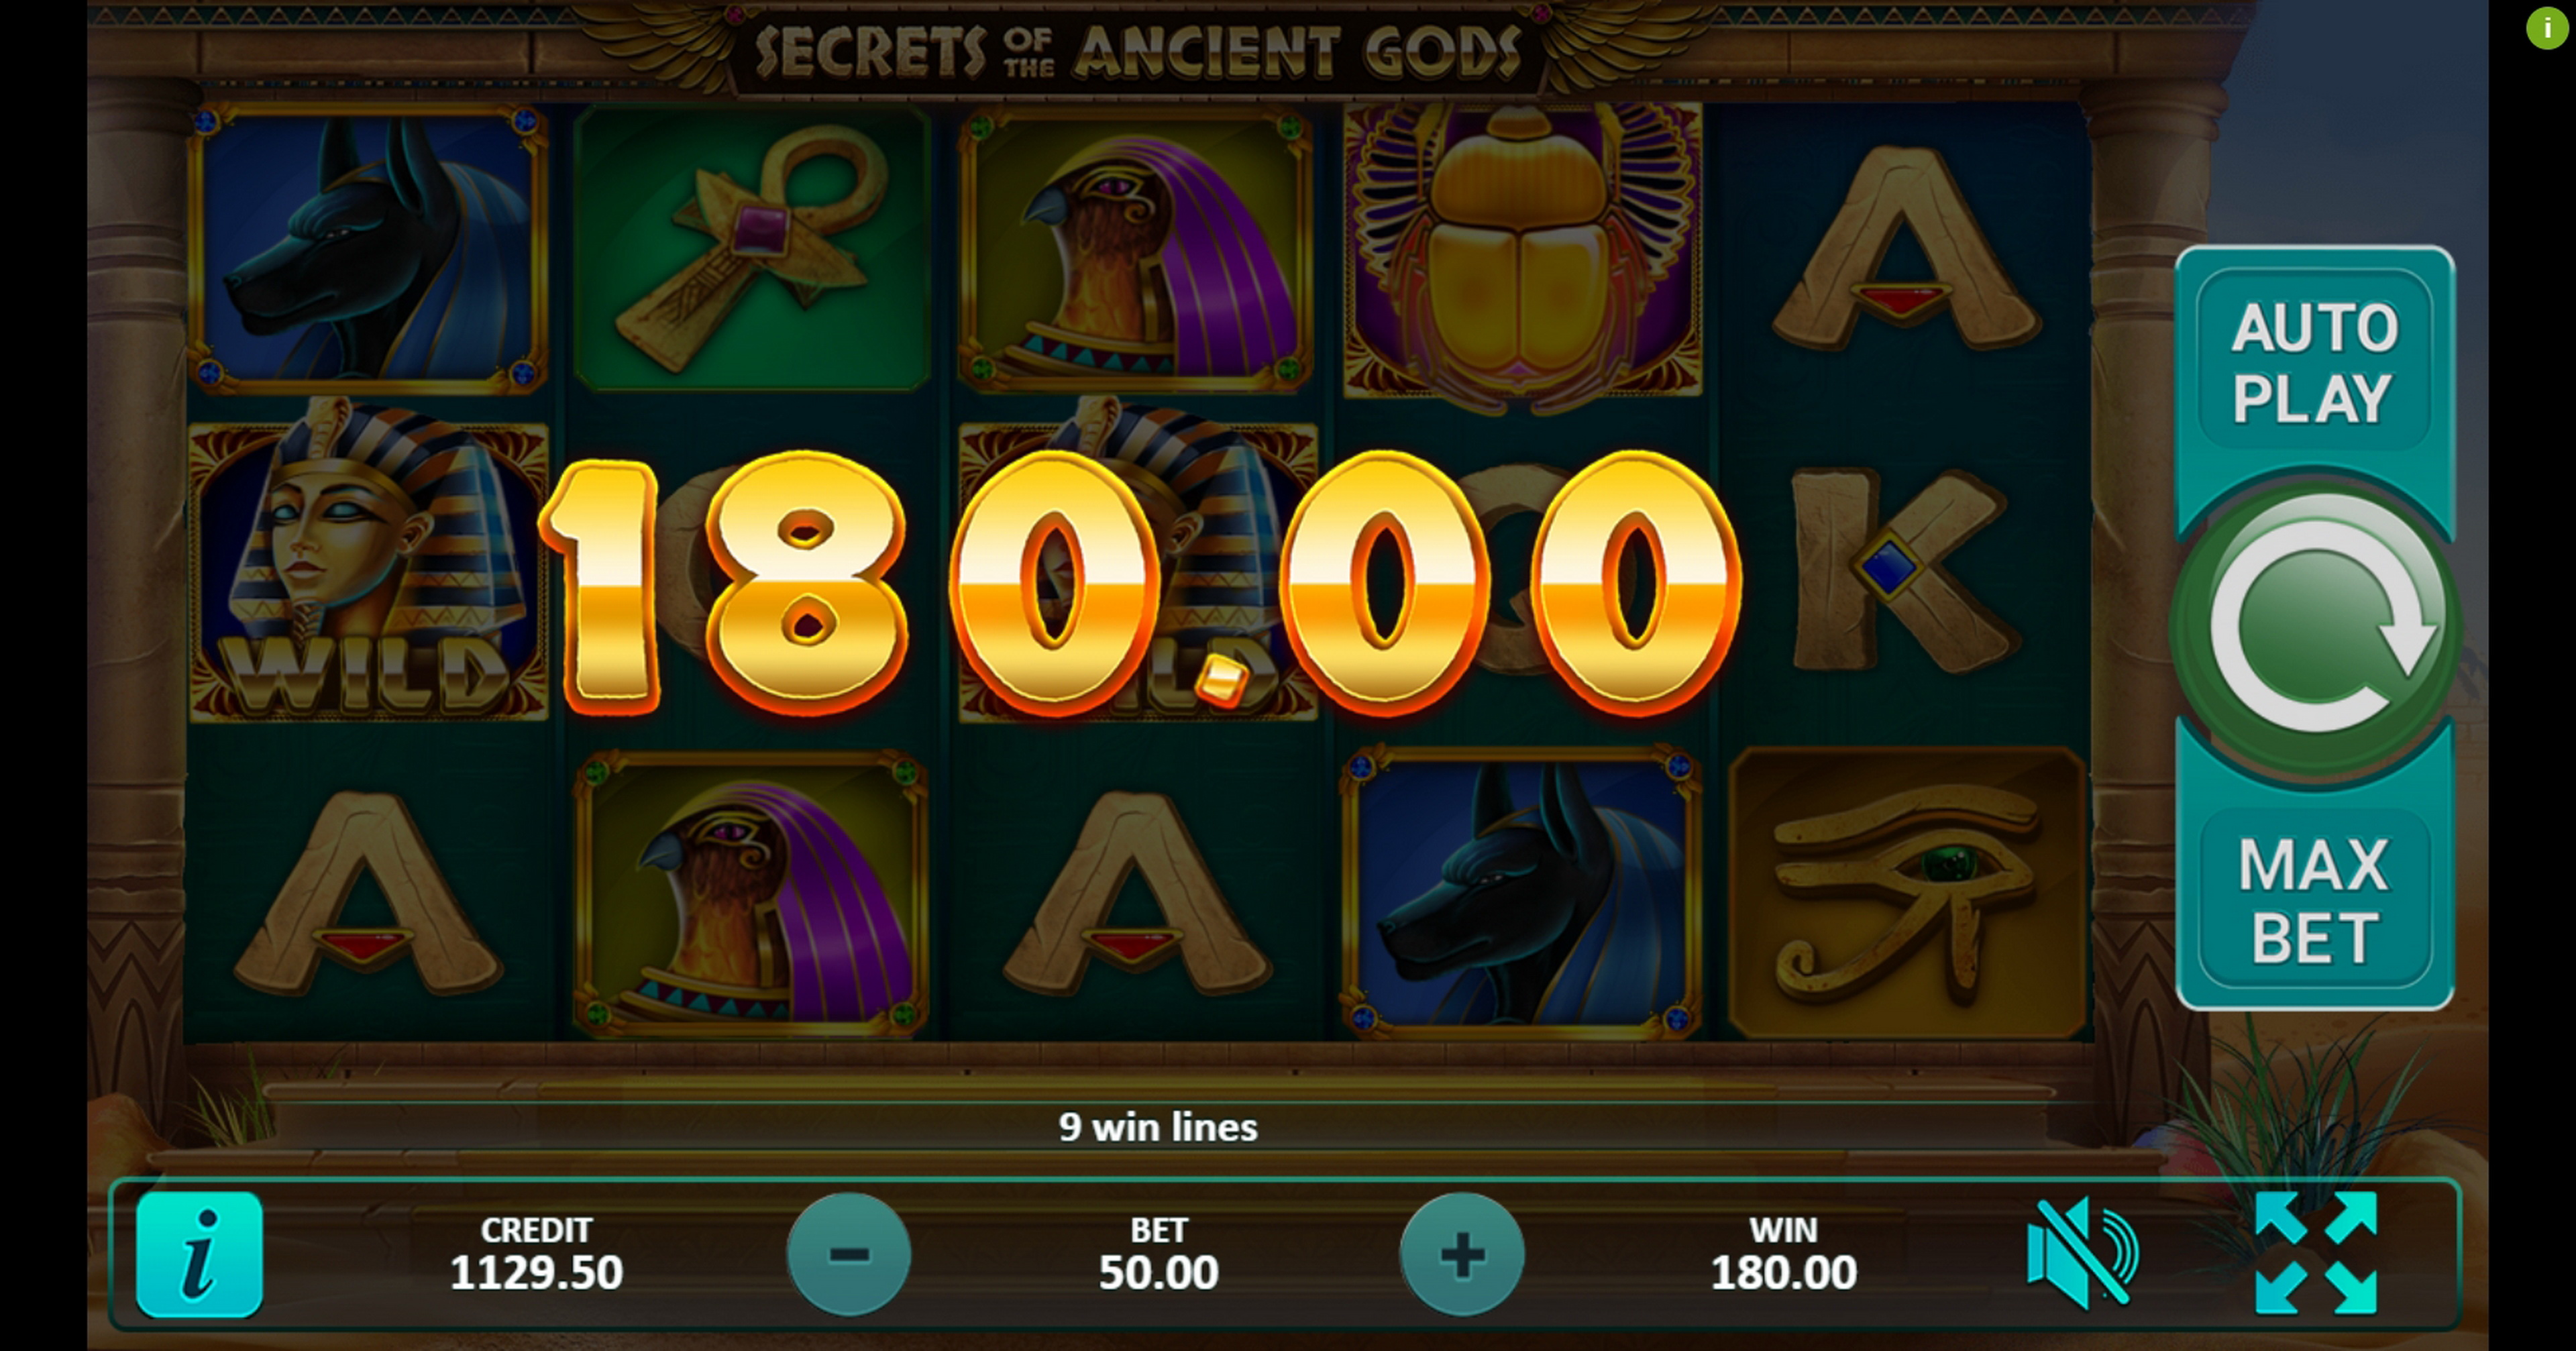 Win Money in Secrets of the Ancient Gods Free Slot Game by Gamefish Global